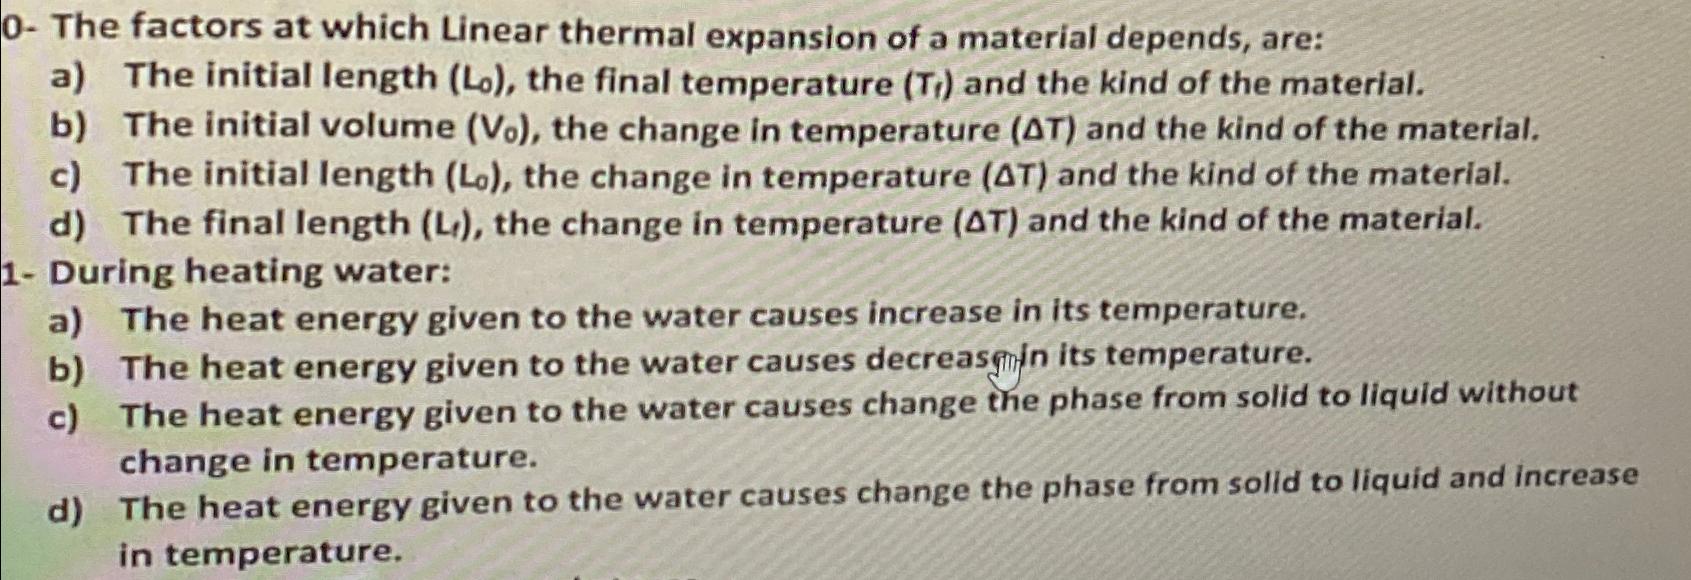 0- The factors at which Linear thermal expansion of a material depends, are: a) The initial length (Lo), the